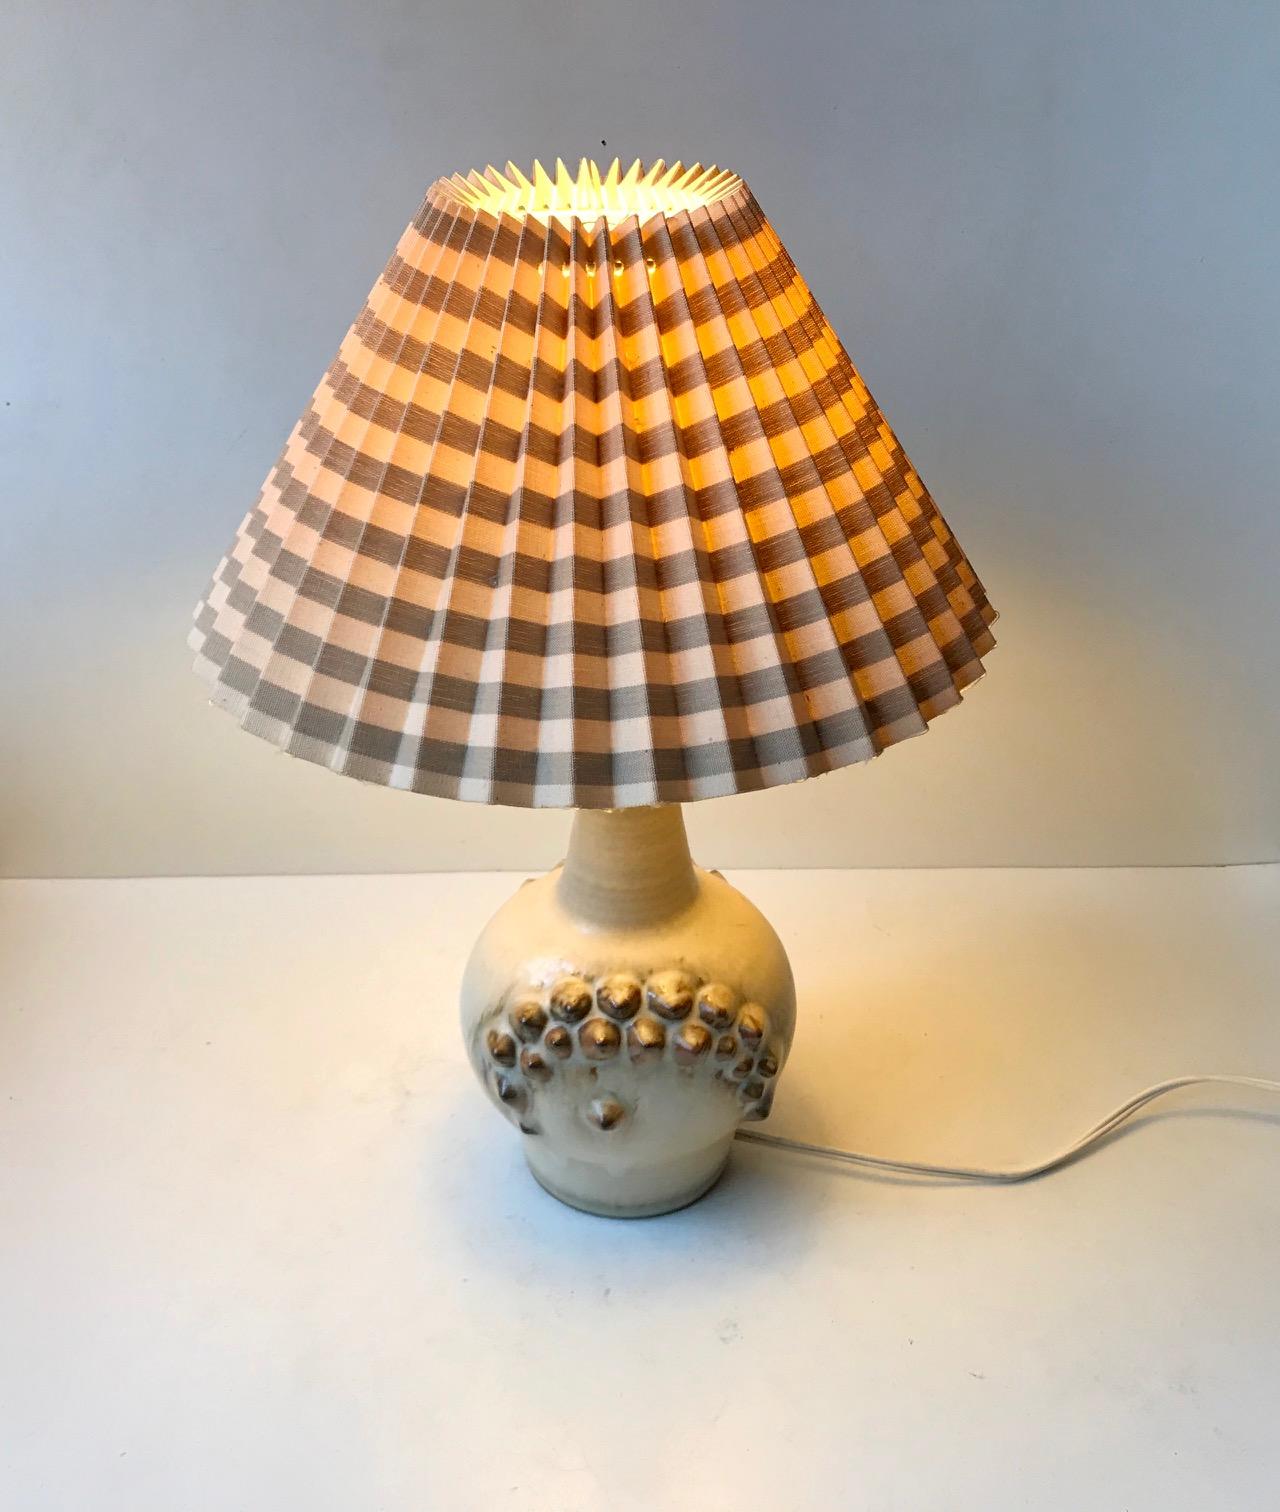 Stoneware Ceramic Table Lamp with Spikes by Einar Johansen for Søholm, 1960s For Sale